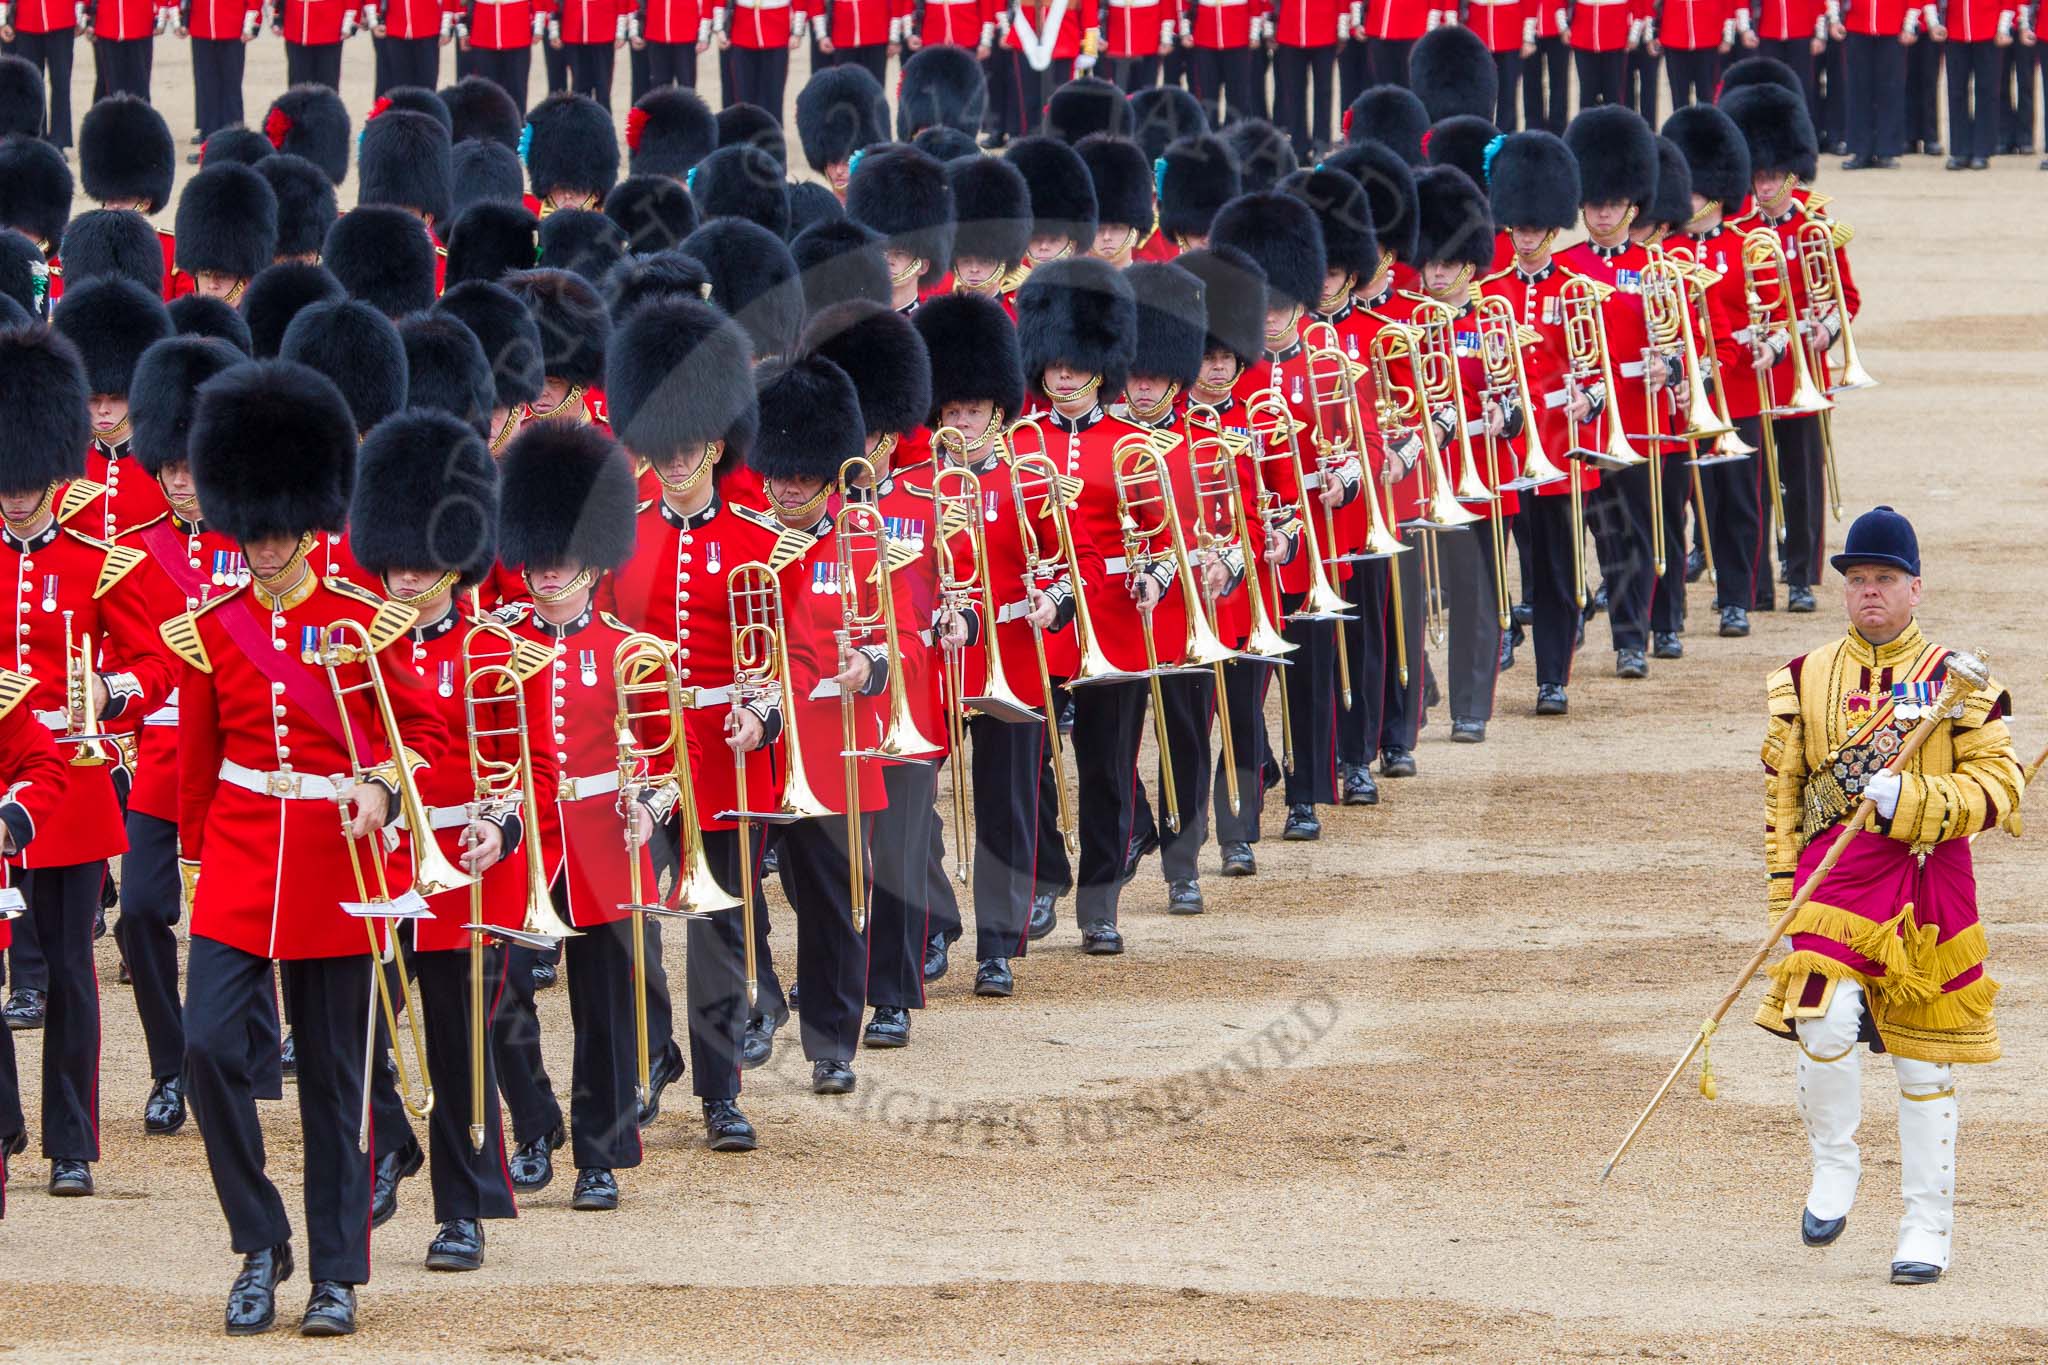 Trooping the Colour 2014.
Horse Guards Parade, Westminster,
London SW1A,

United Kingdom,
on 14 June 2014 at 11:53, image #720